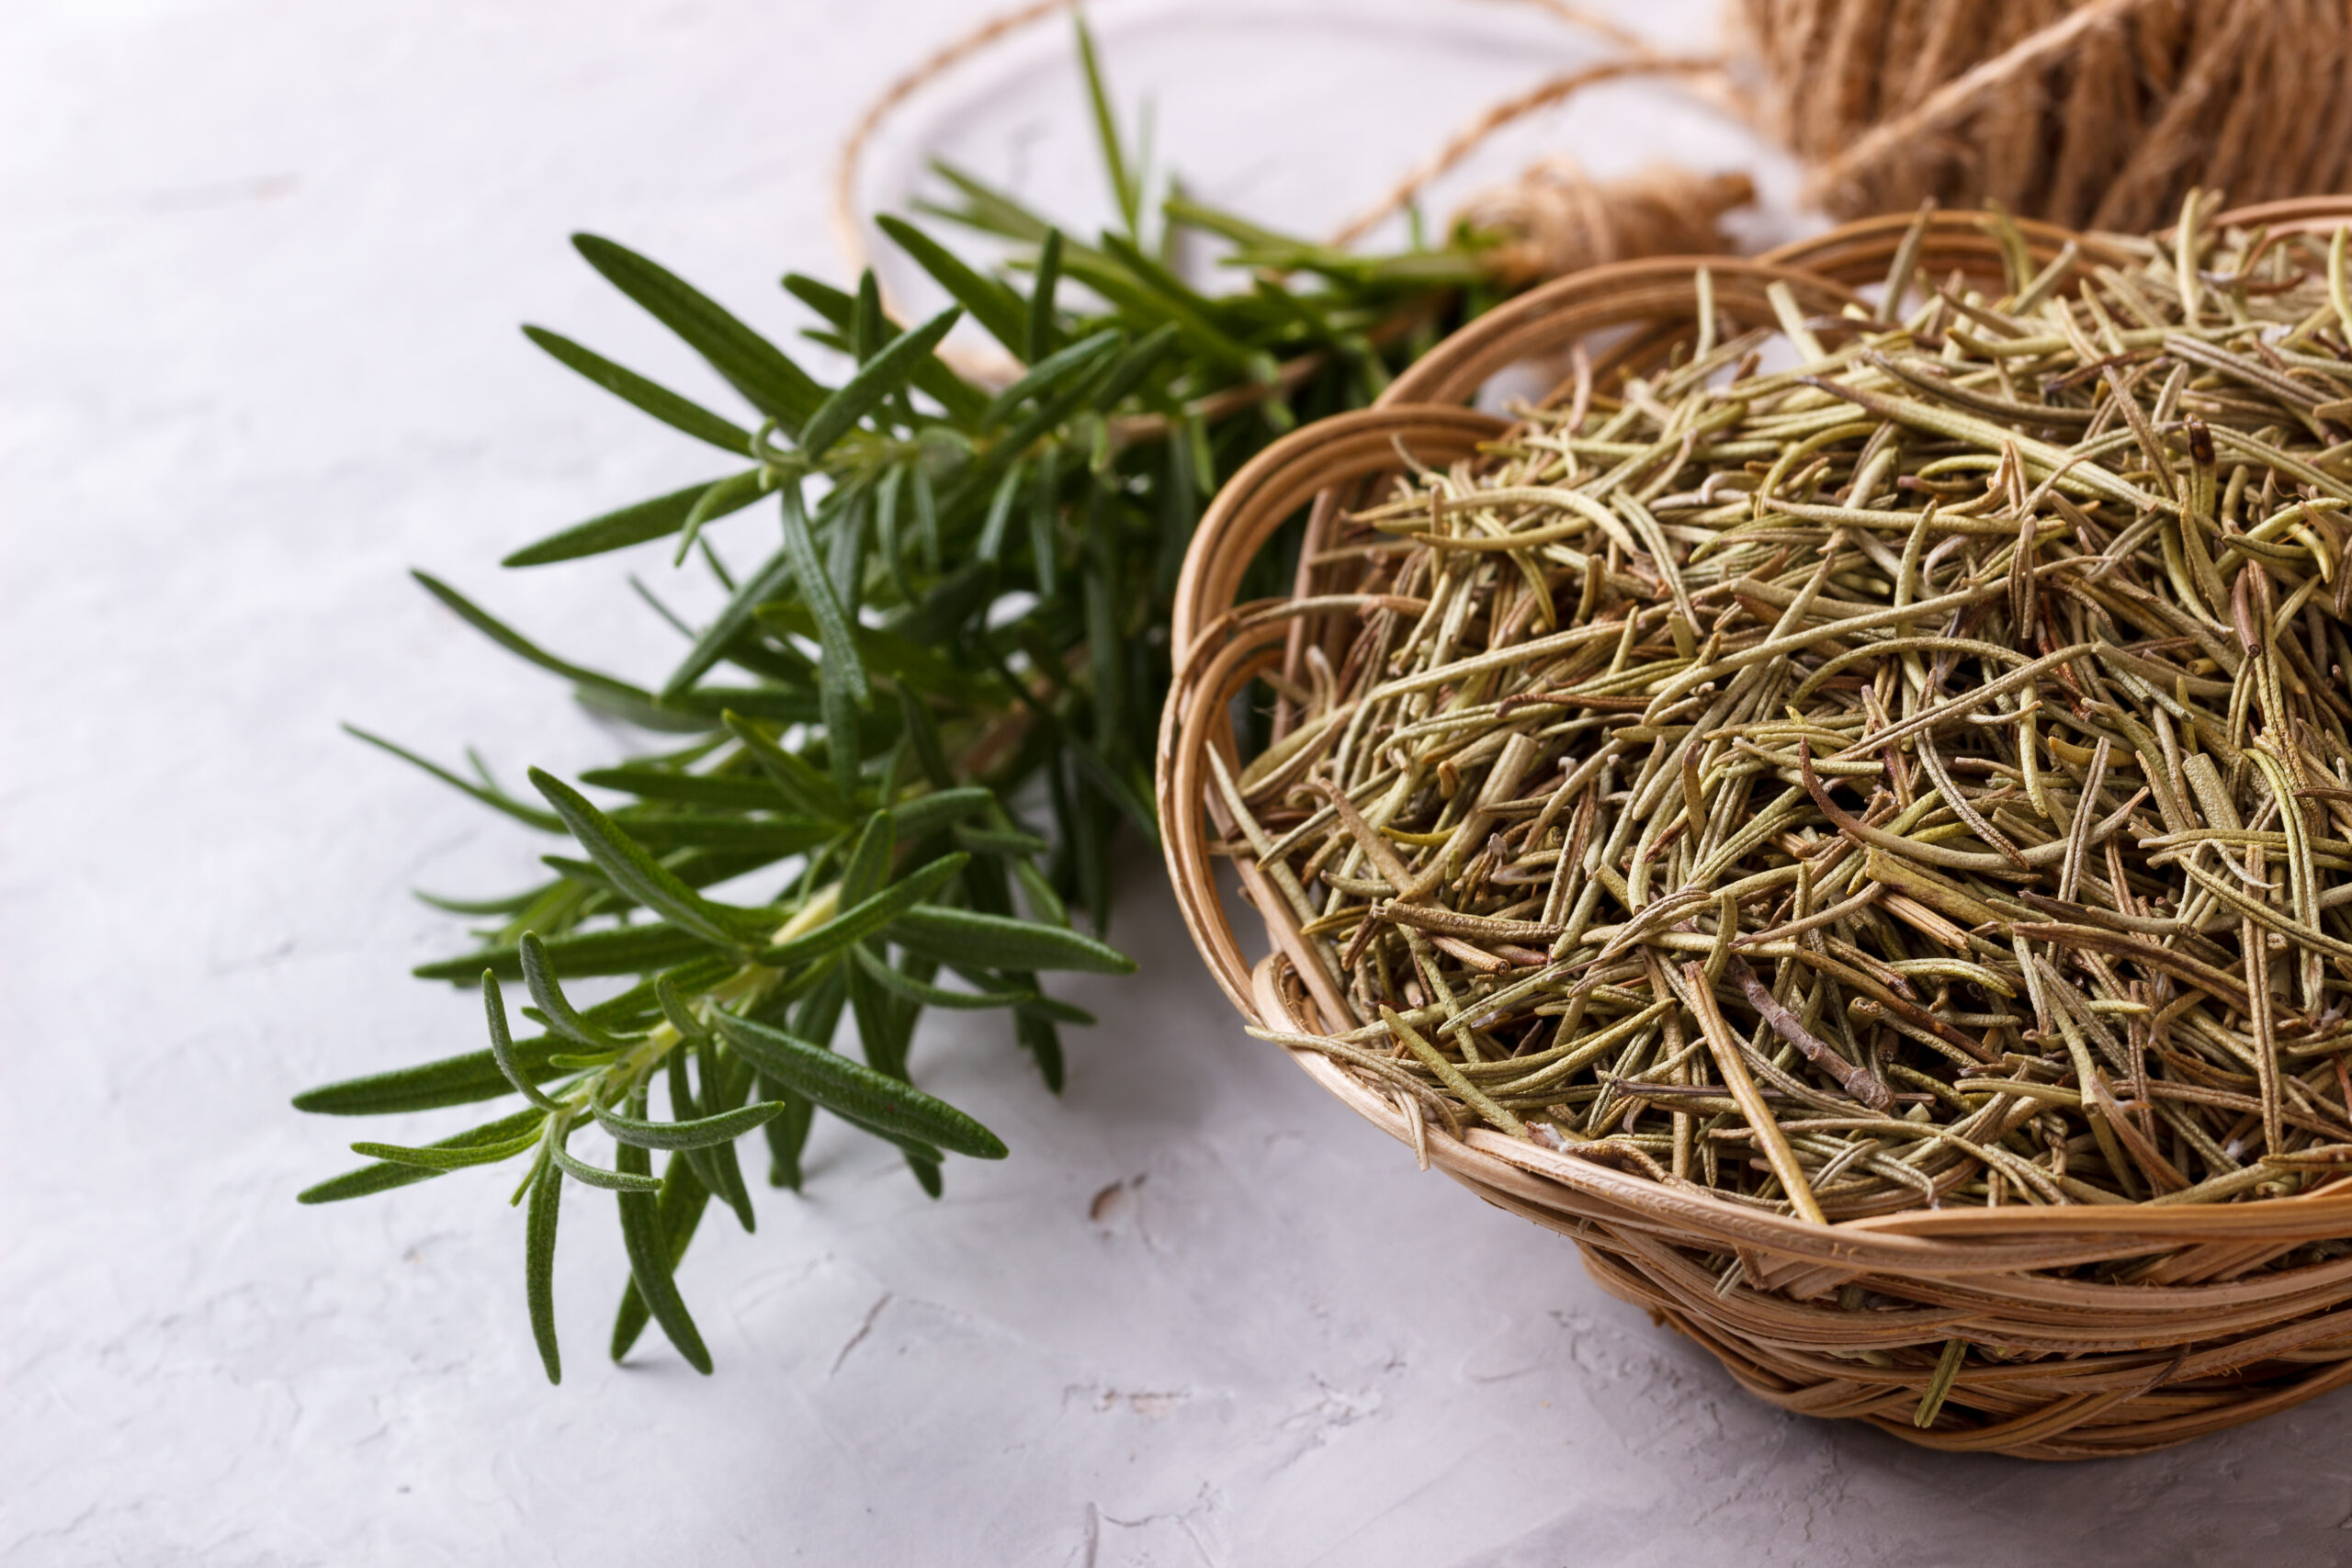 Substituting dried rosemary for fresh